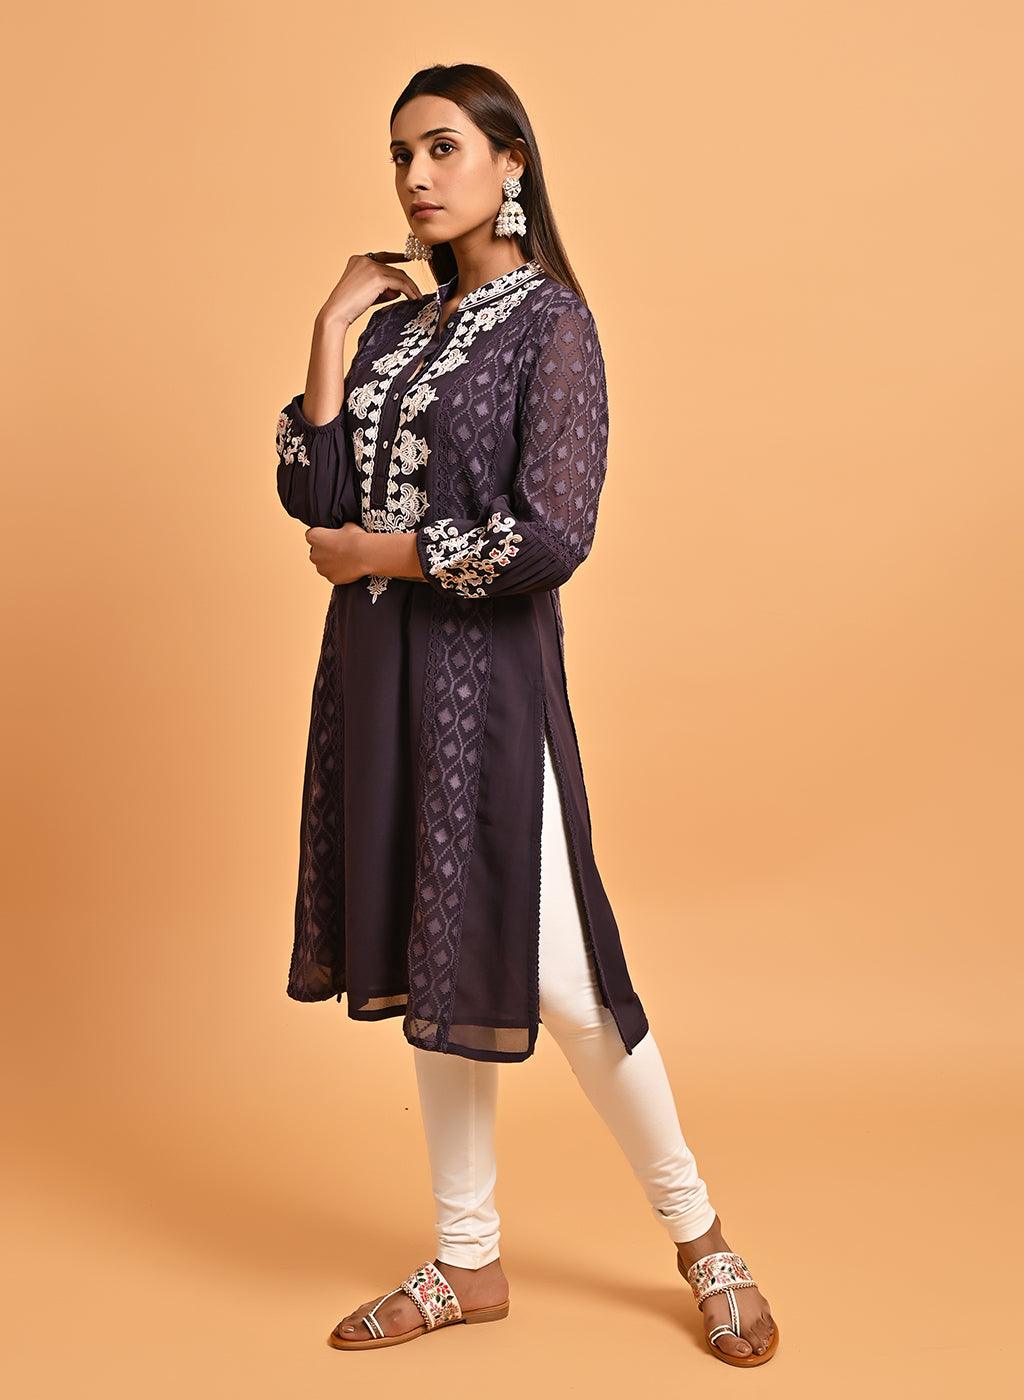 Shop for Latest White Embroidered Kurti For Women Online | Lakshita